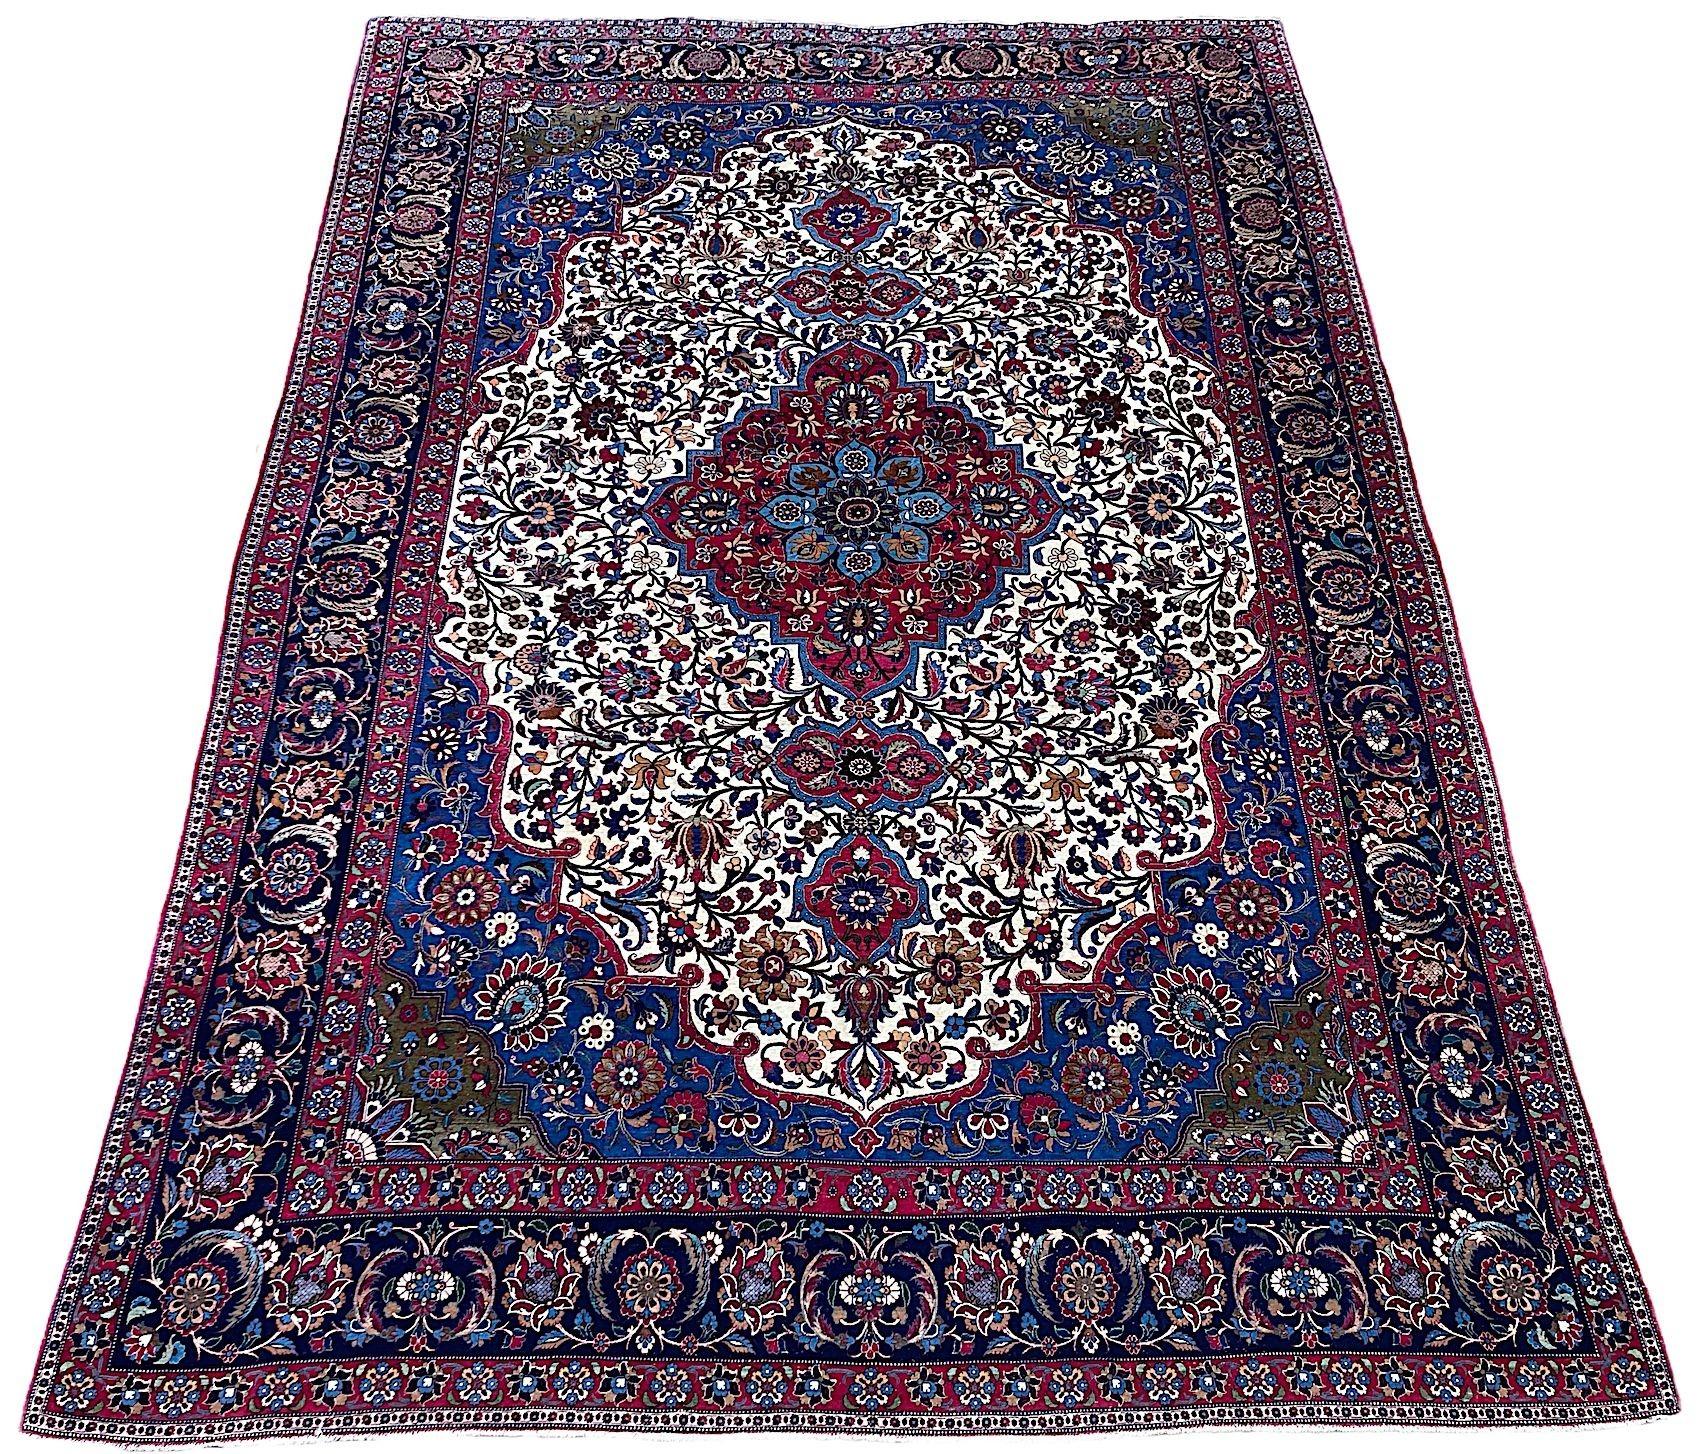 An outstanding wool & silk Isfahan carpet, hand woven circa 1920. The design features a single medallion on an ivory field of flowers and vines surrounded by an indigo border of large flower heads. Finely woven (8x8 knots per centimetre and a